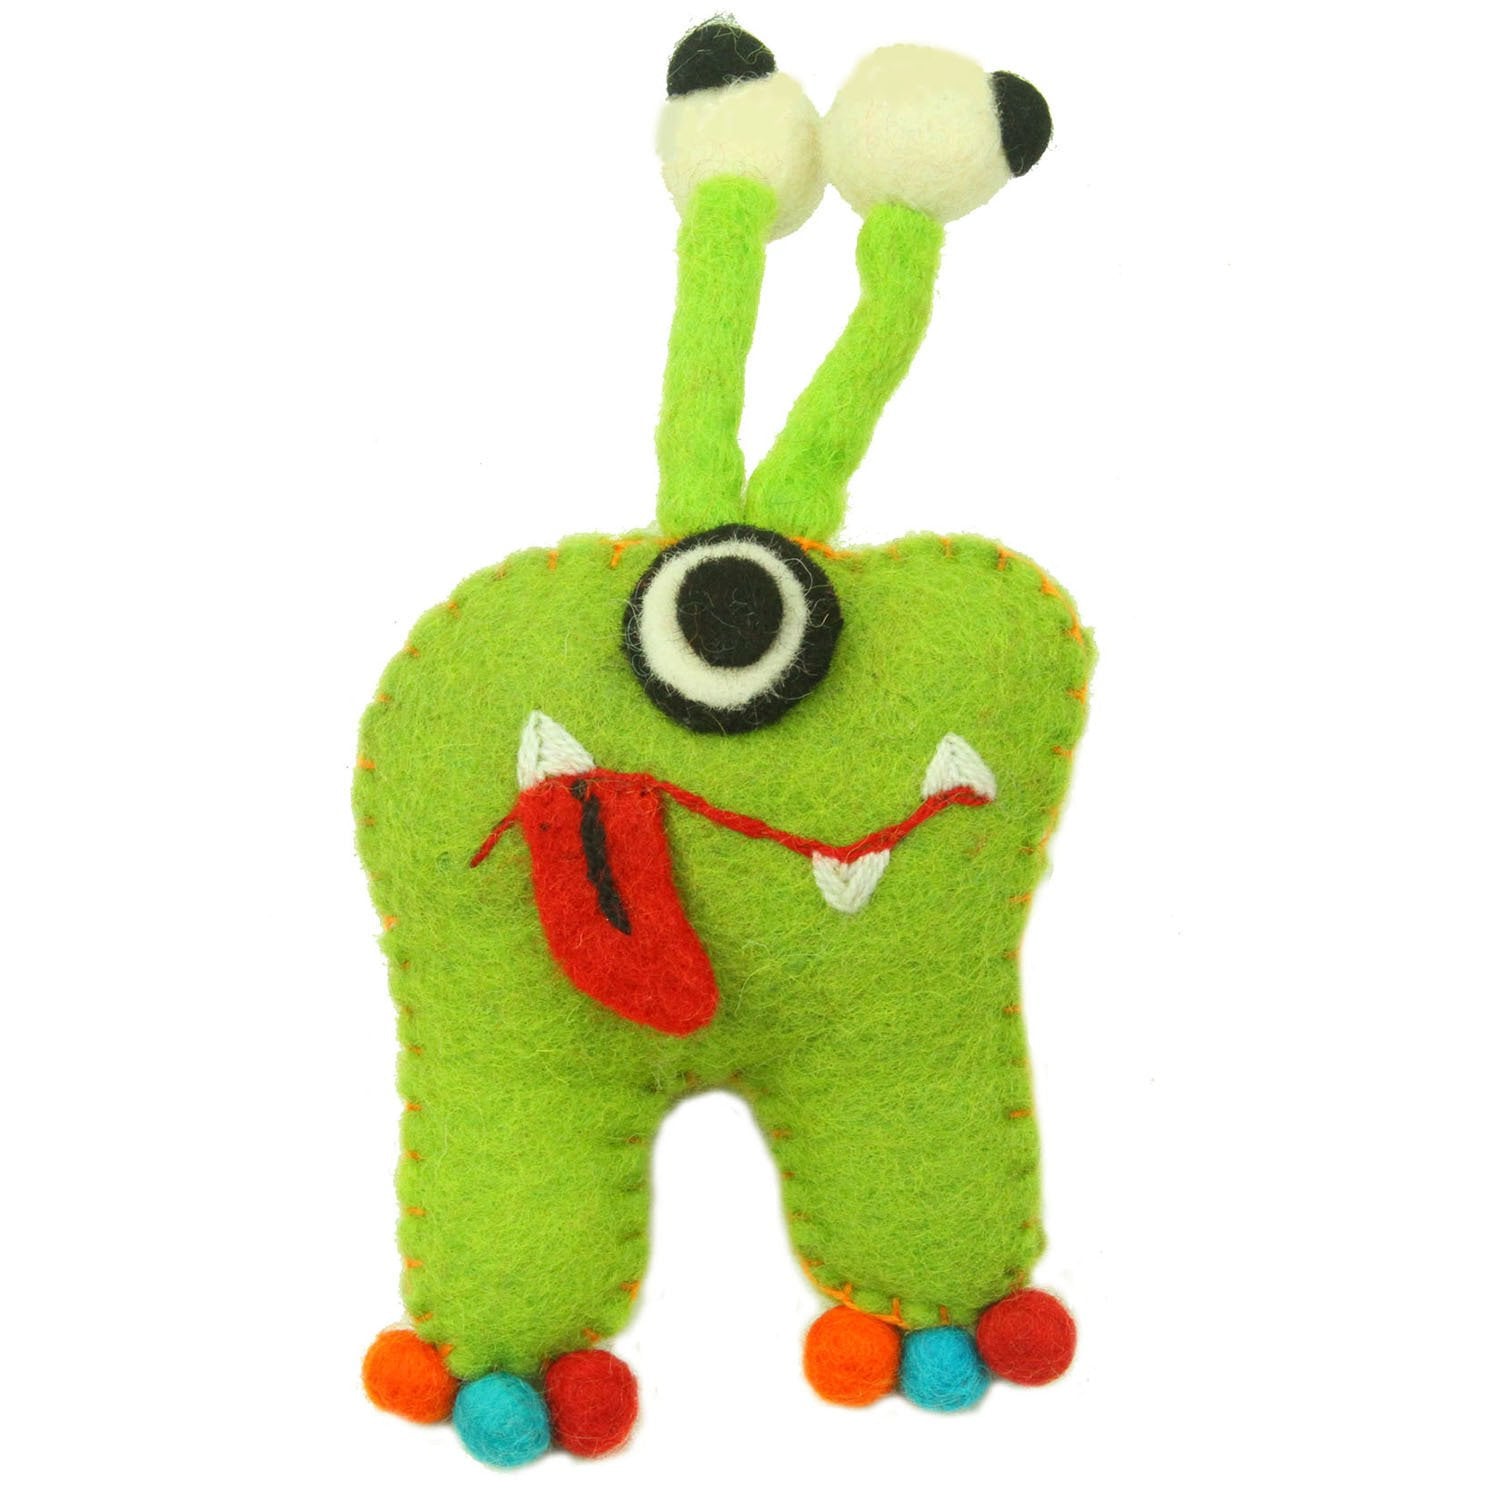 Hand Felted Green Tooth Monster with Bug Eyes